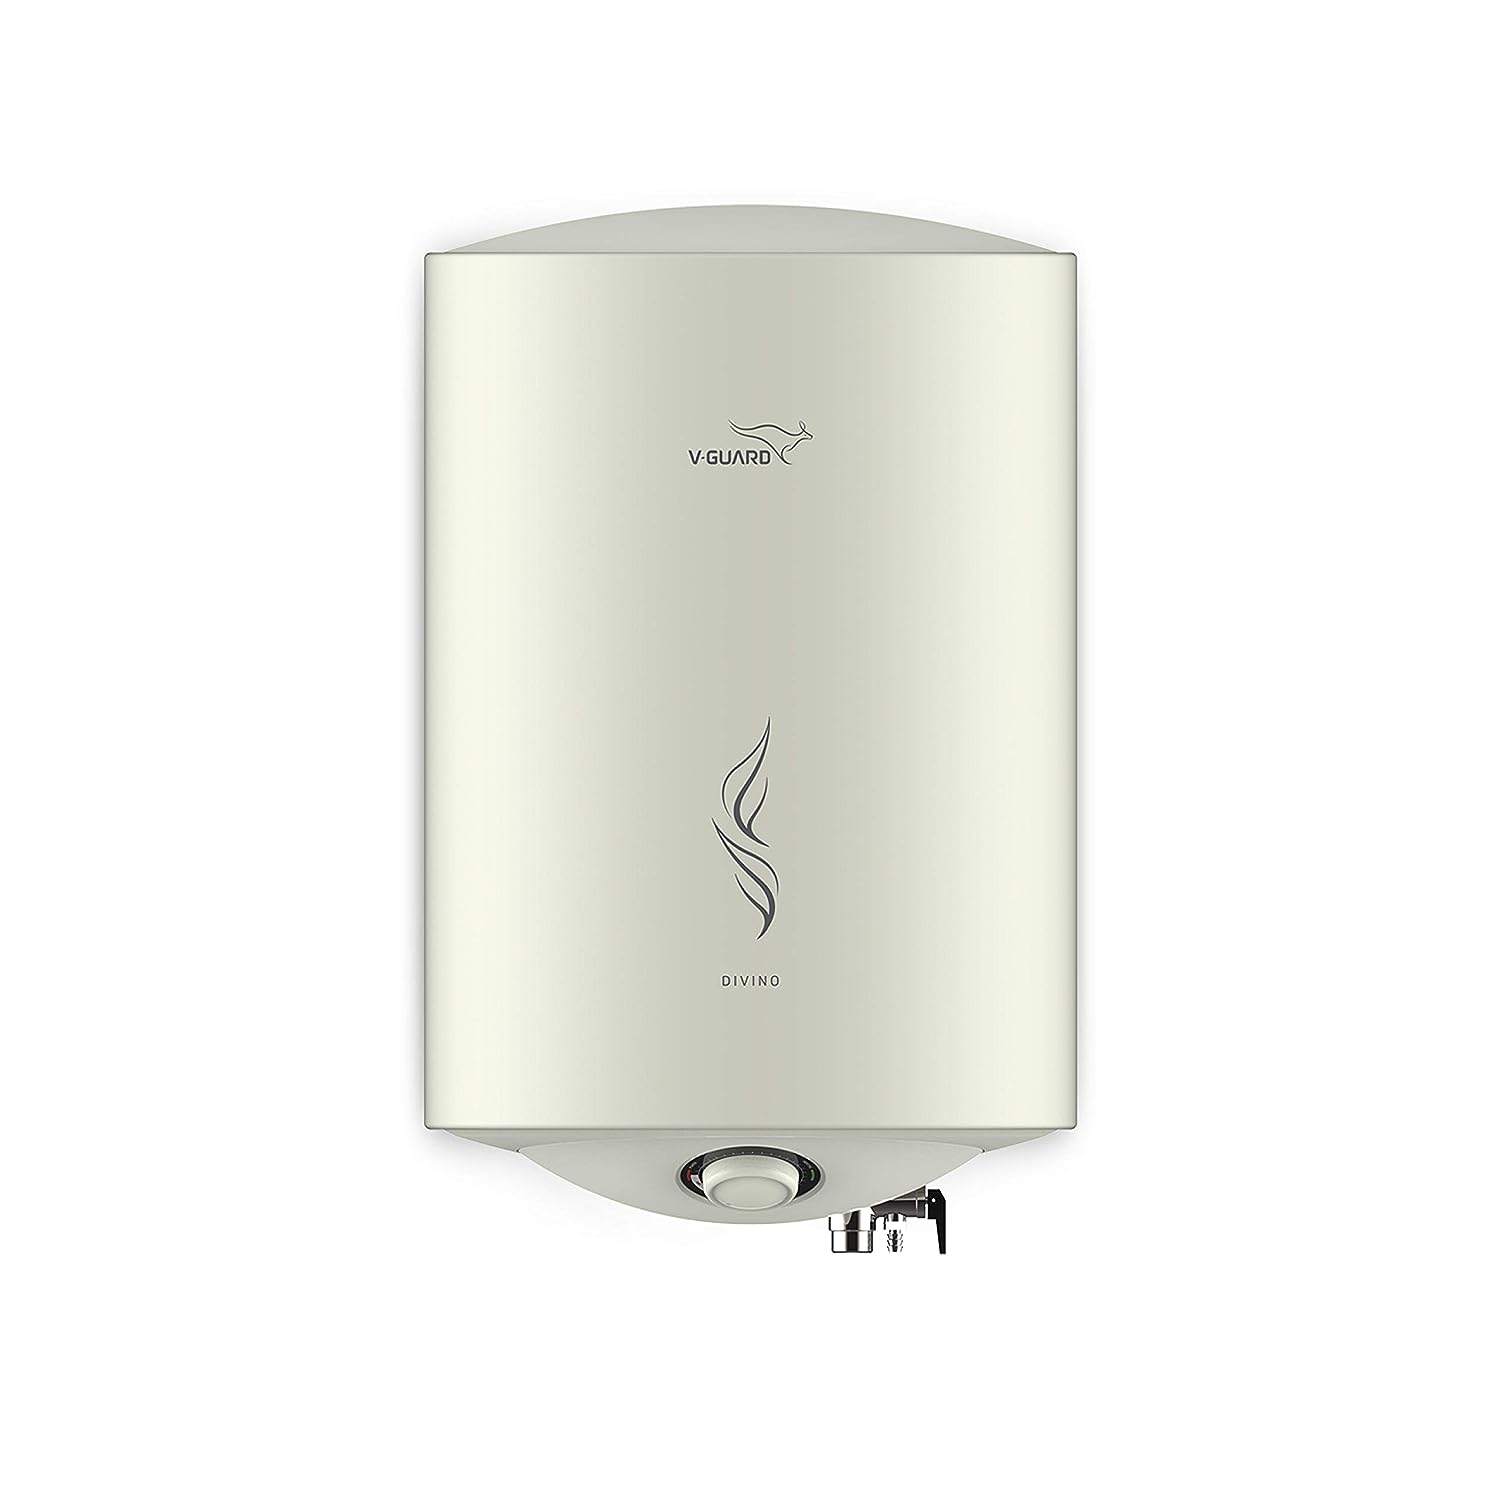 V-Guard Divino 5 Star Rated 25 Litre Storage Water Heater (Geyser)